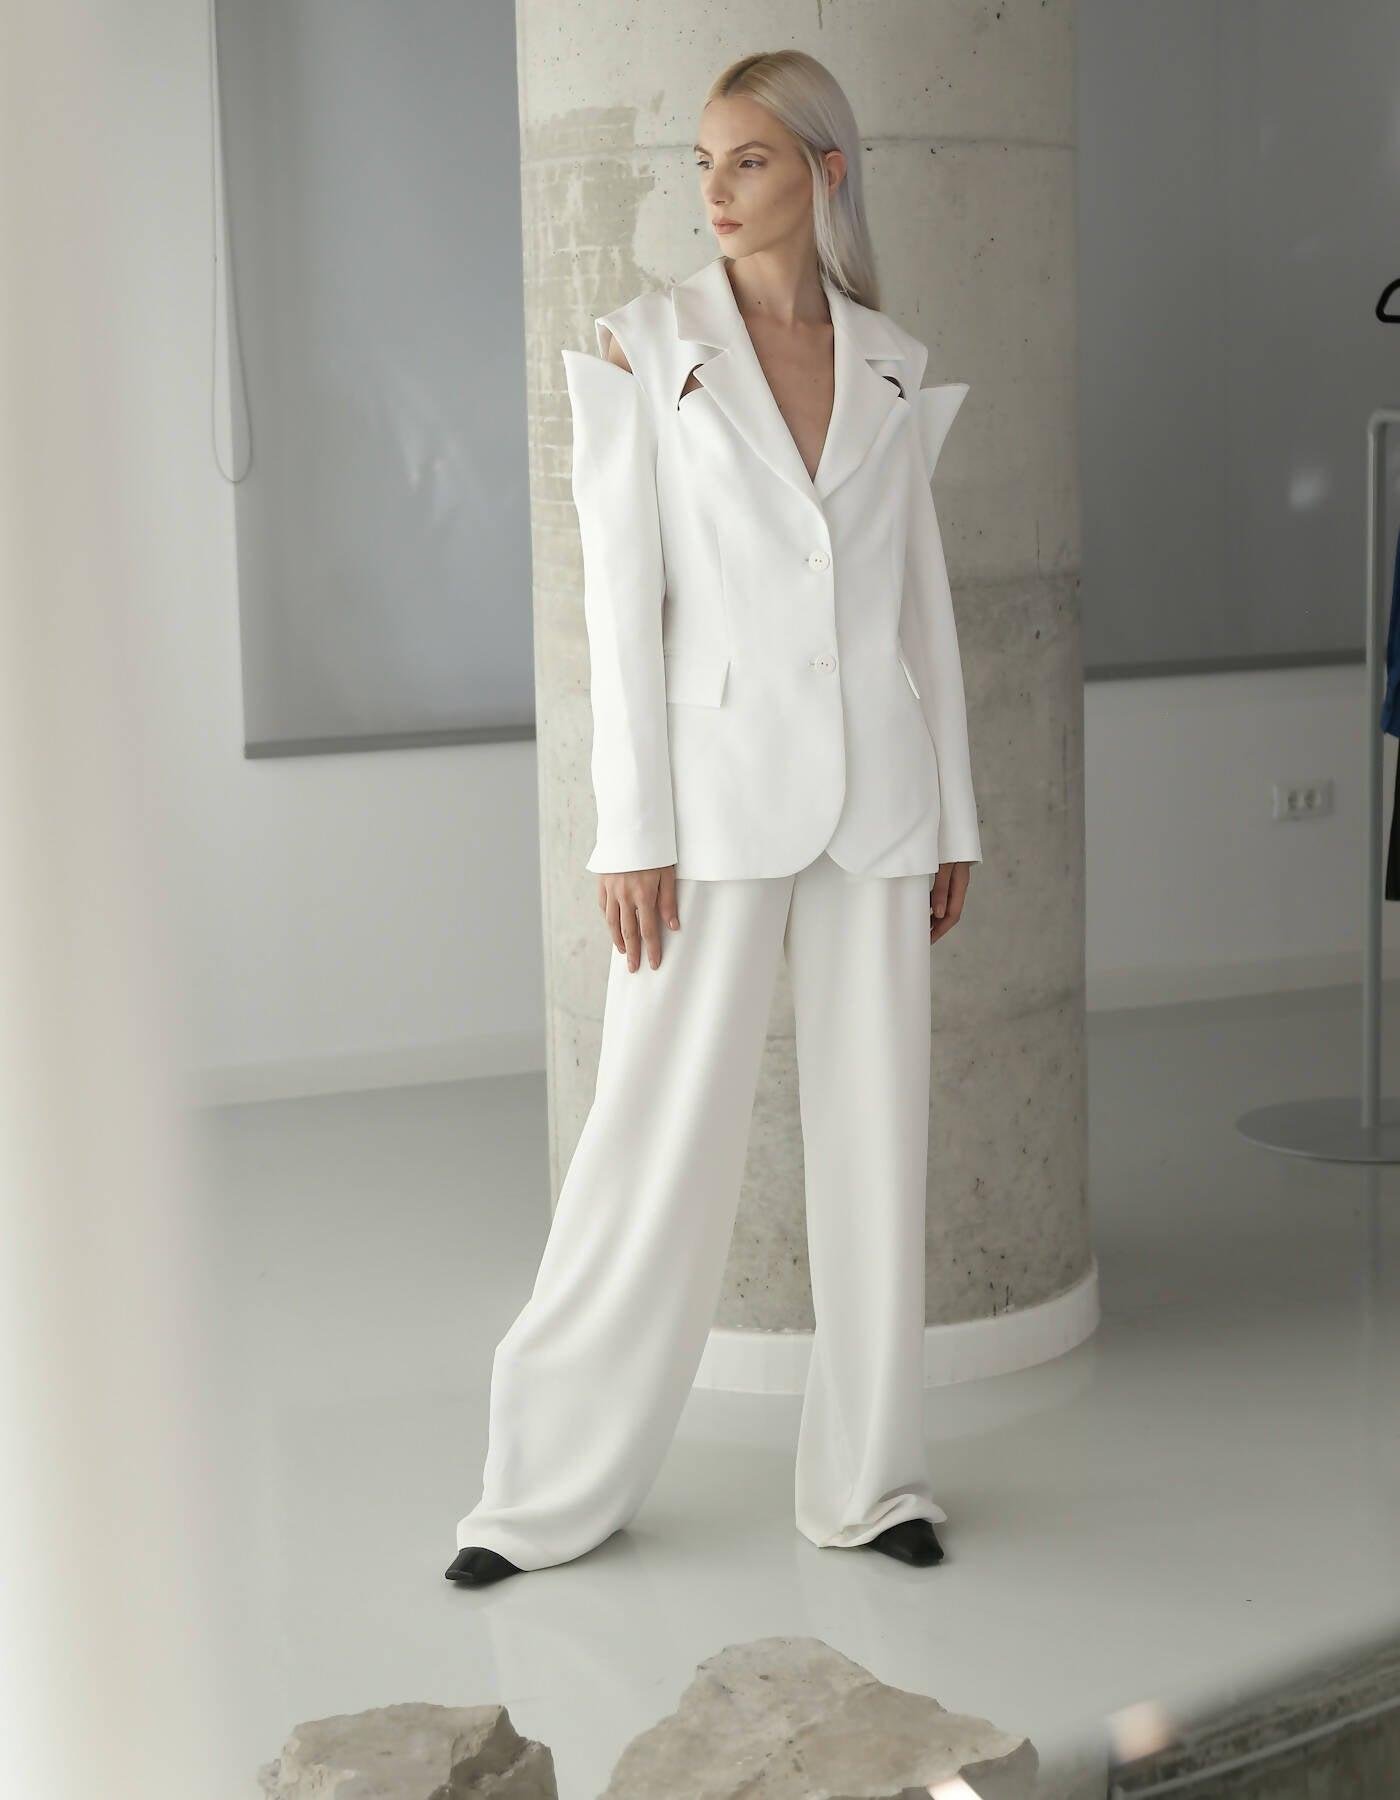 Makeda White Pantsuit with Cut Outs by MAET STUDIO